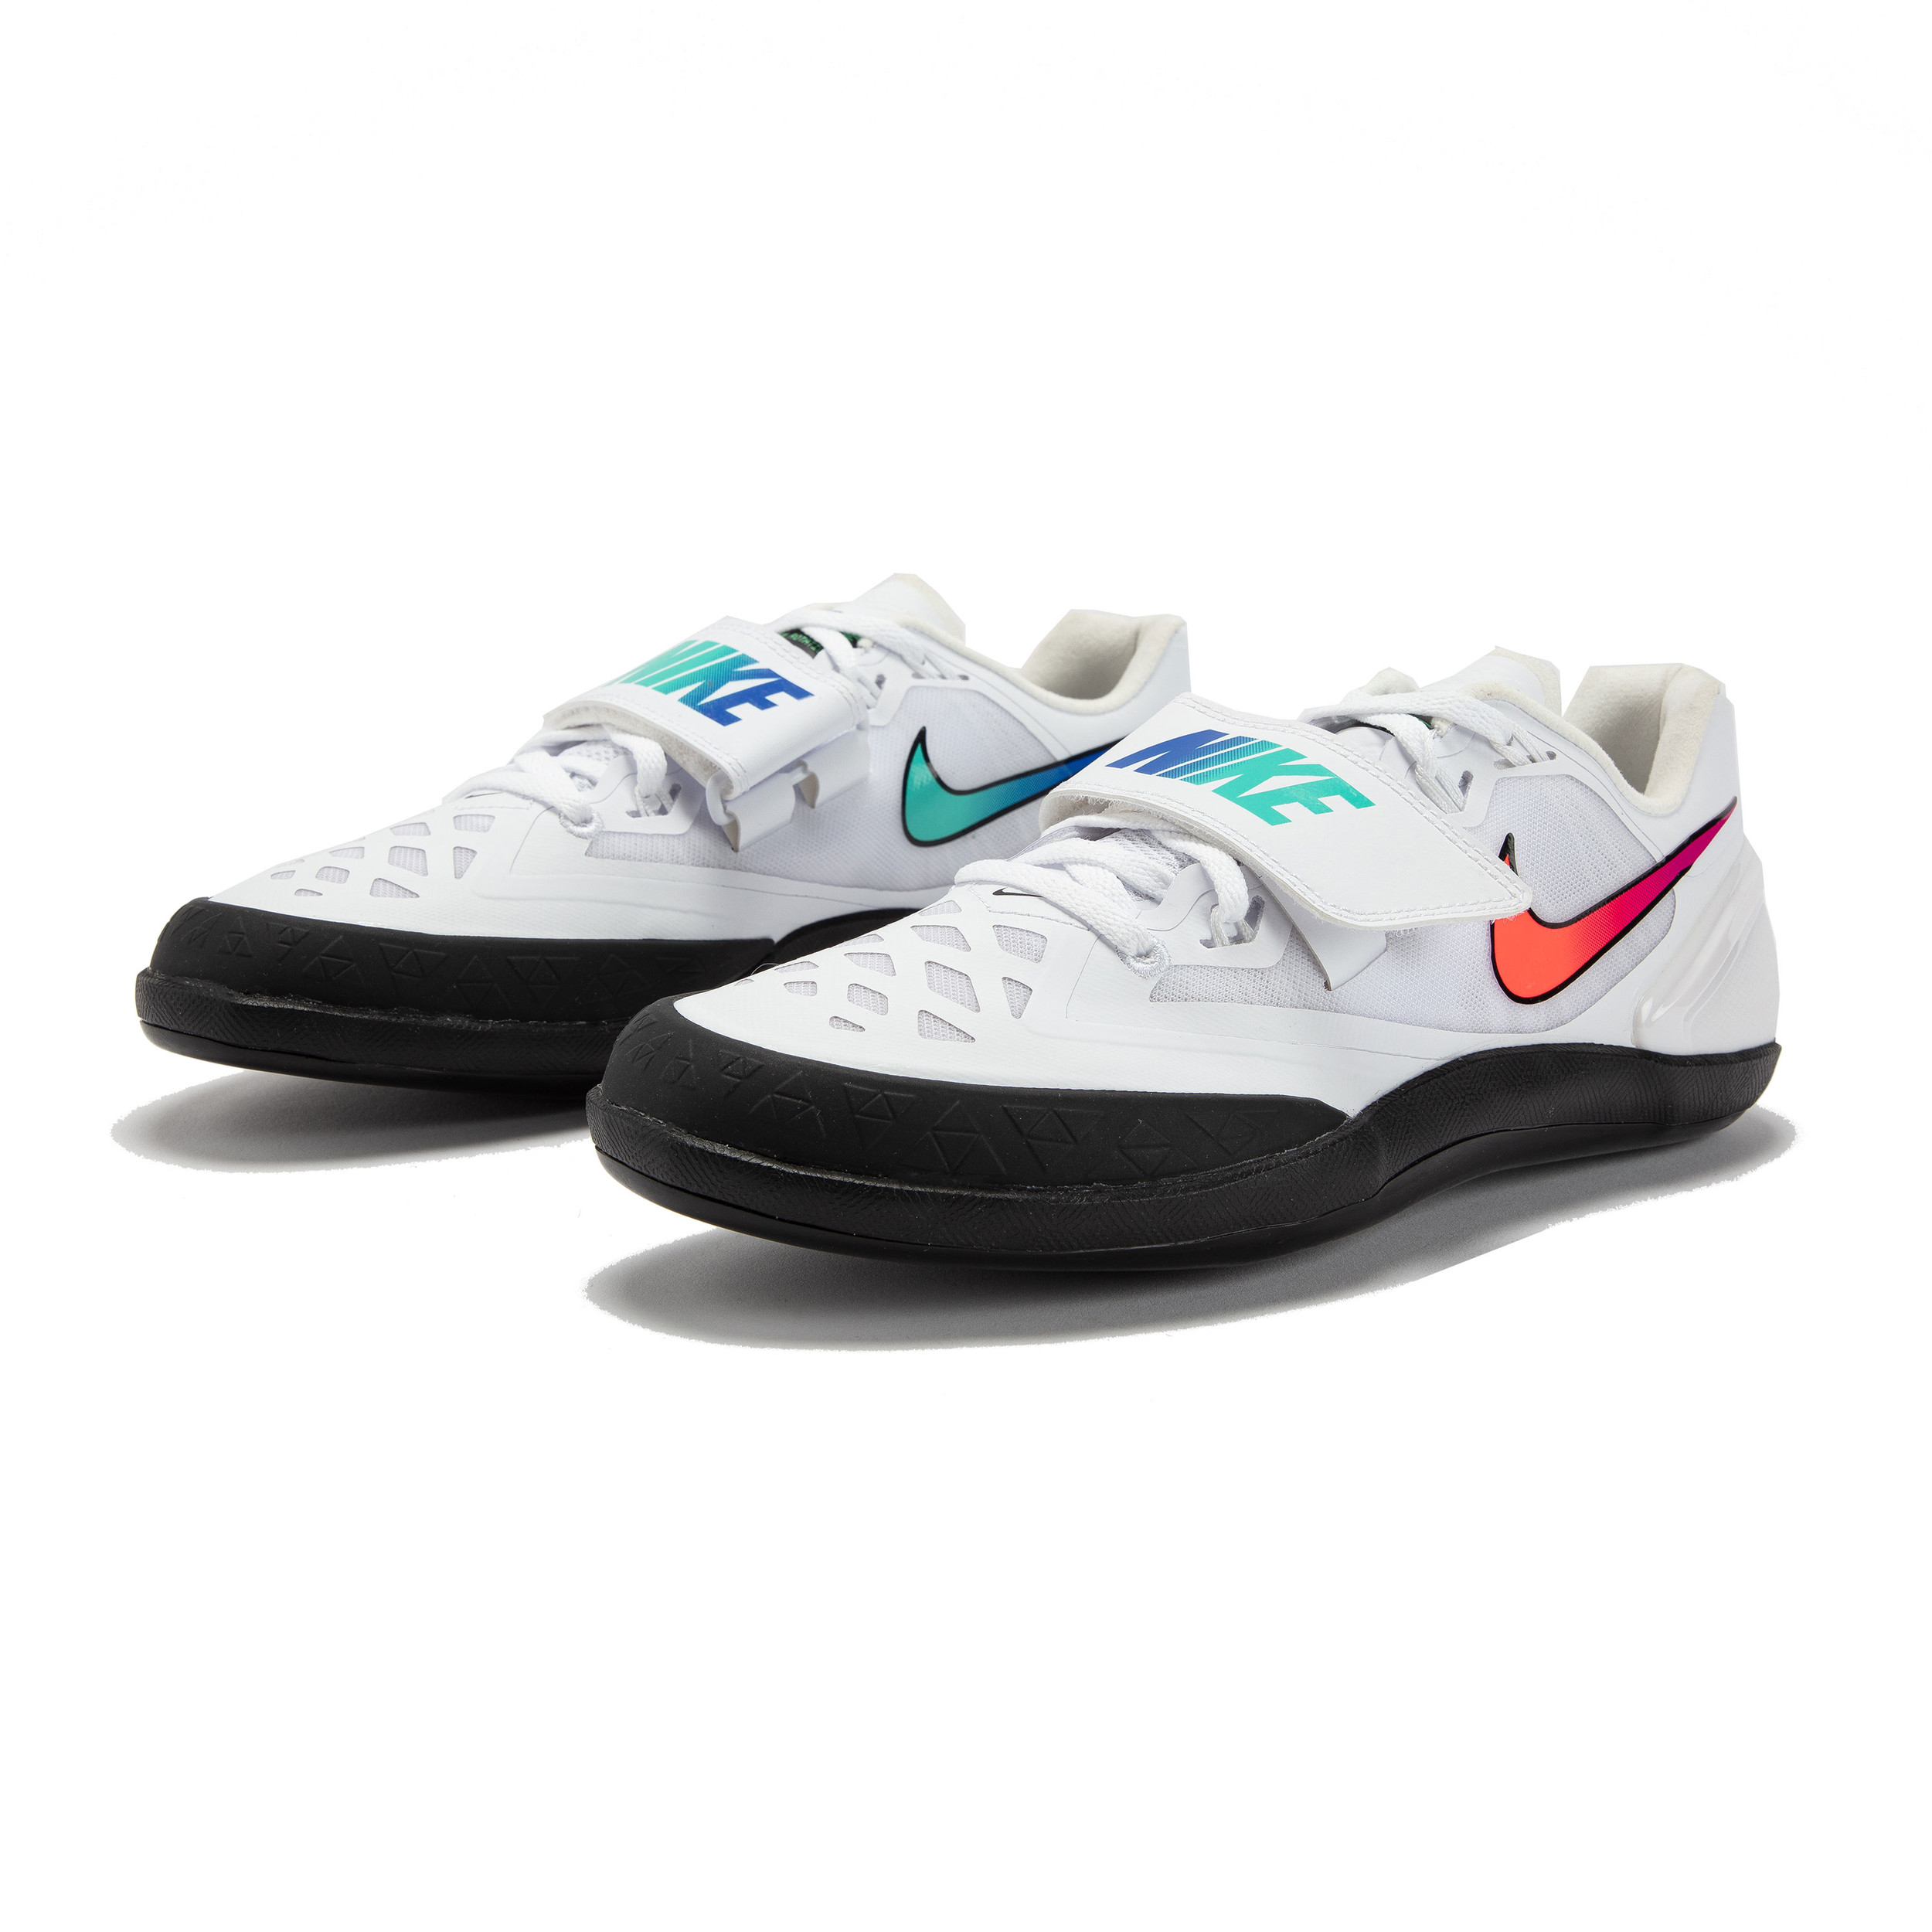 Nike Zoom Rotational 6 Throwing chaussures - HO20